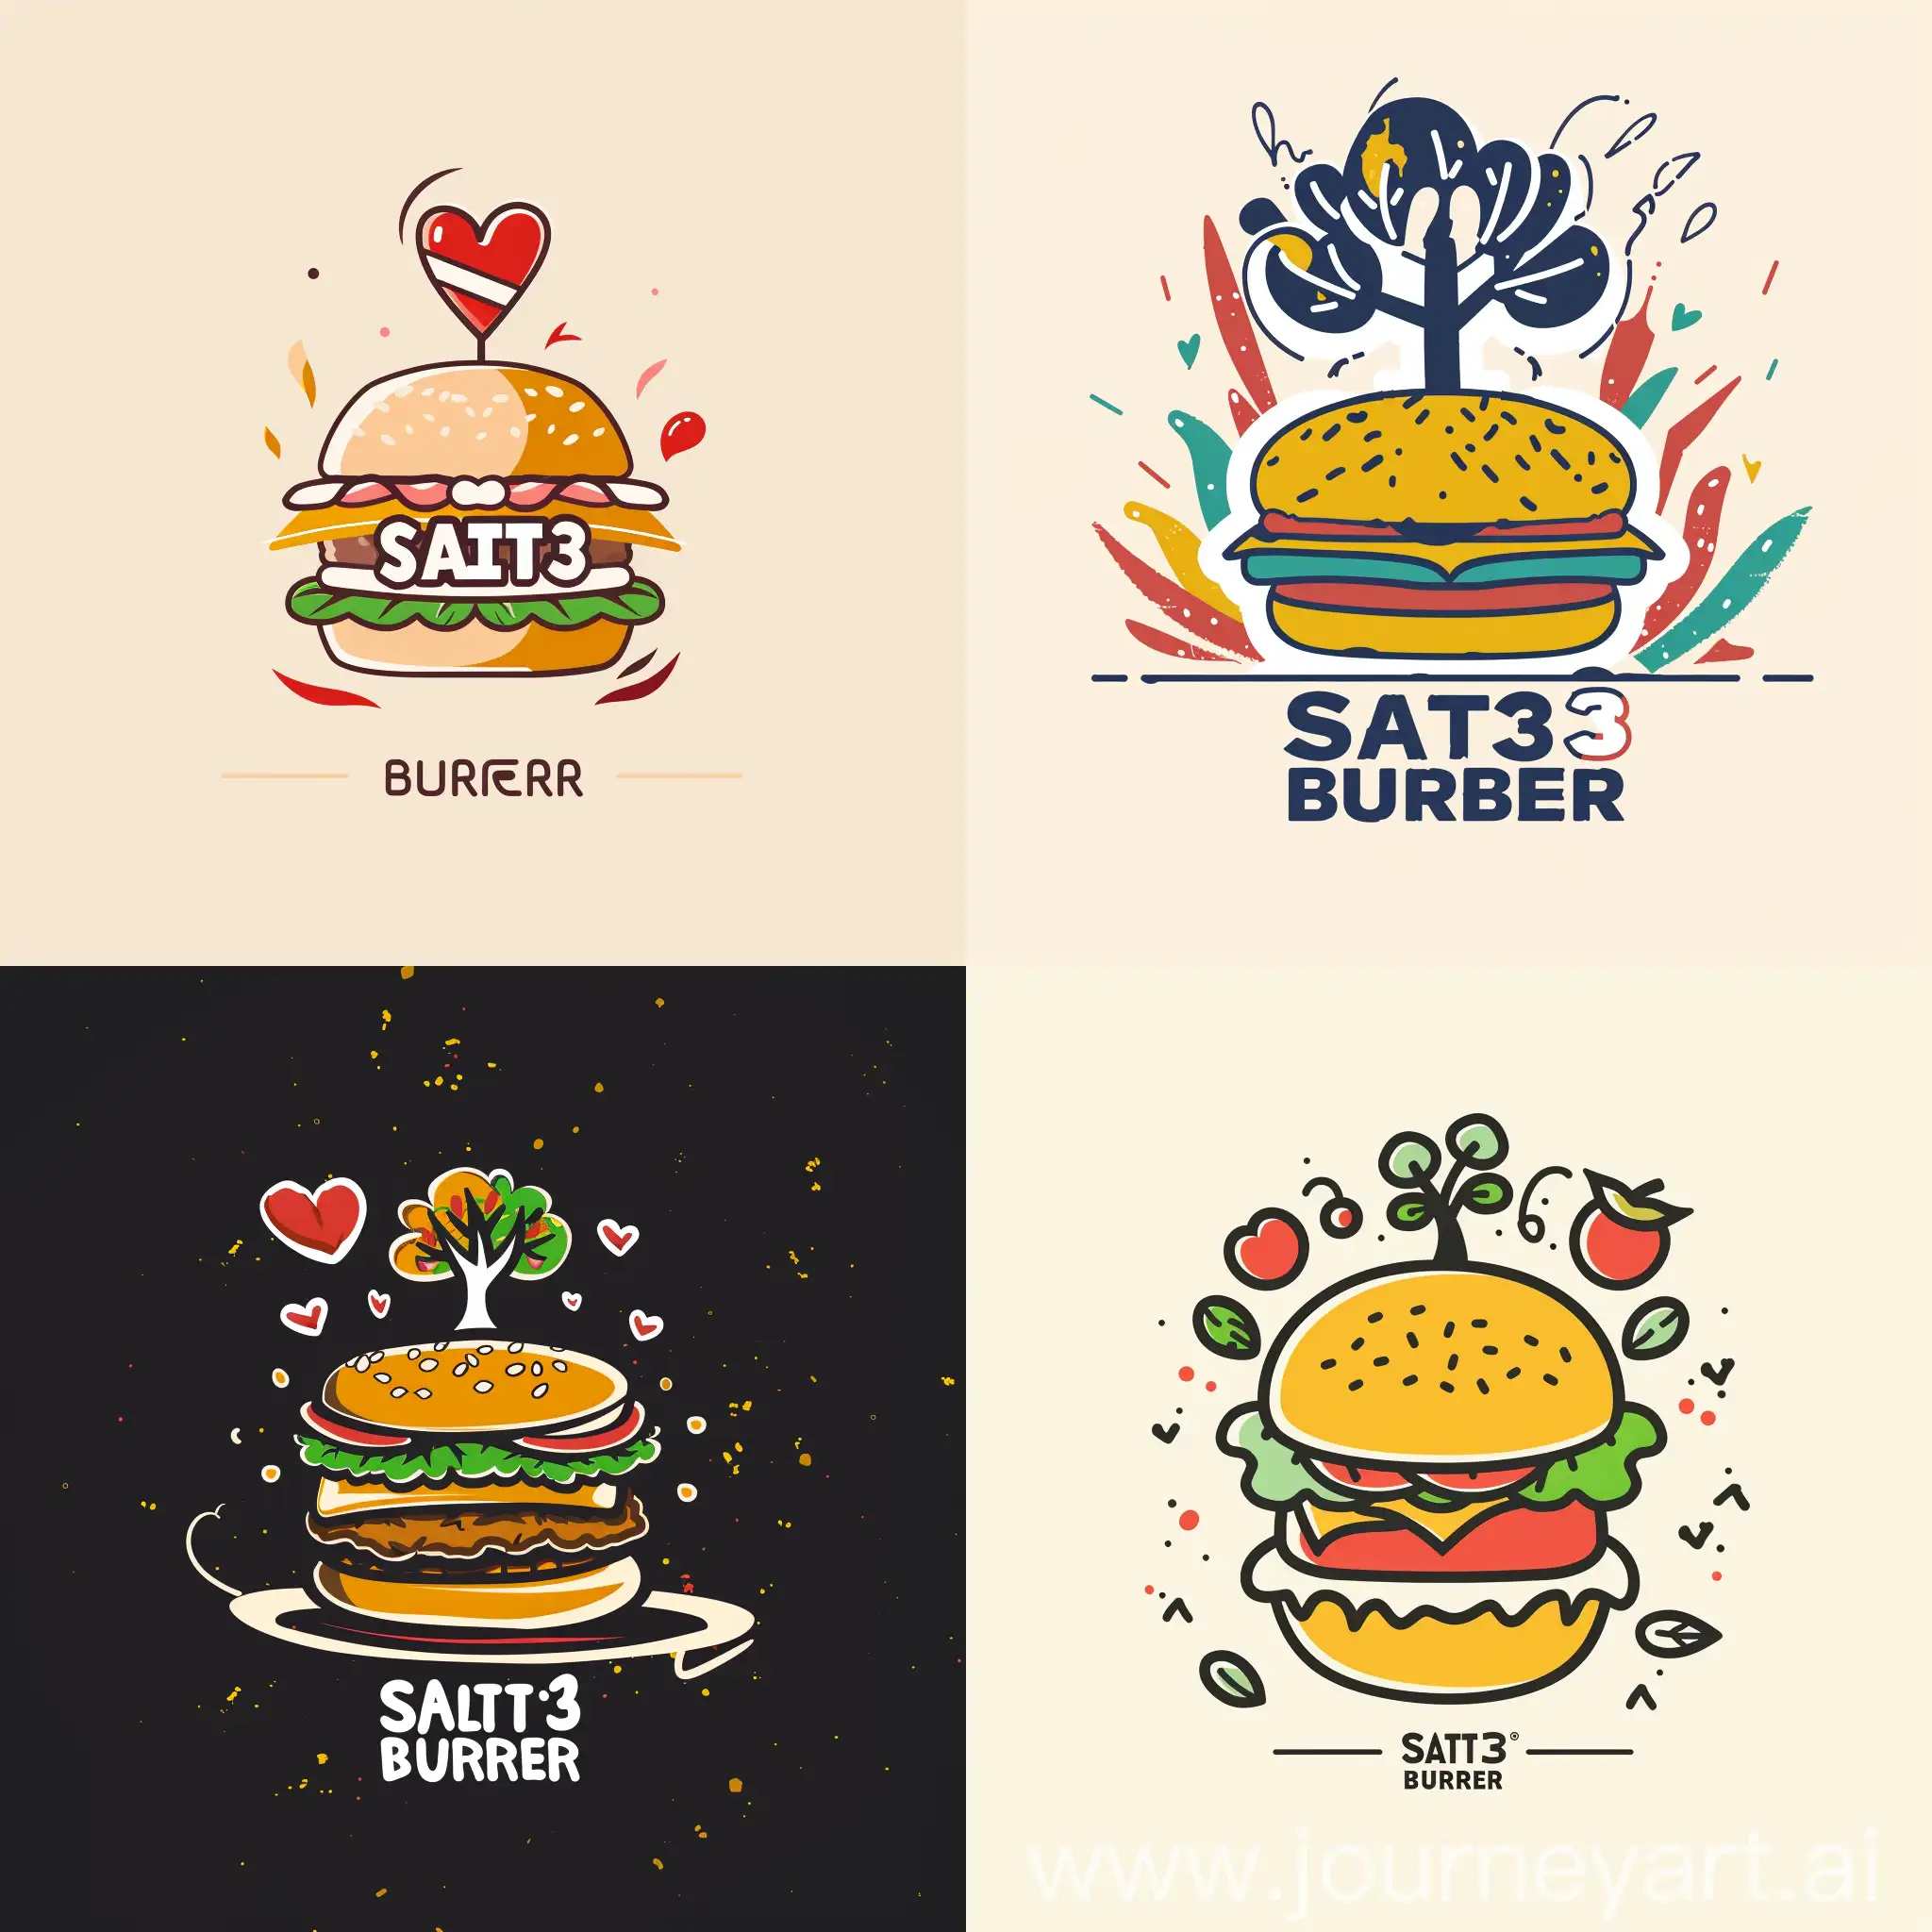 FamilyFriendly-Burger-and-Fried-Chicken-Restaurant-Logo-Design-with-Vibrant-Colors